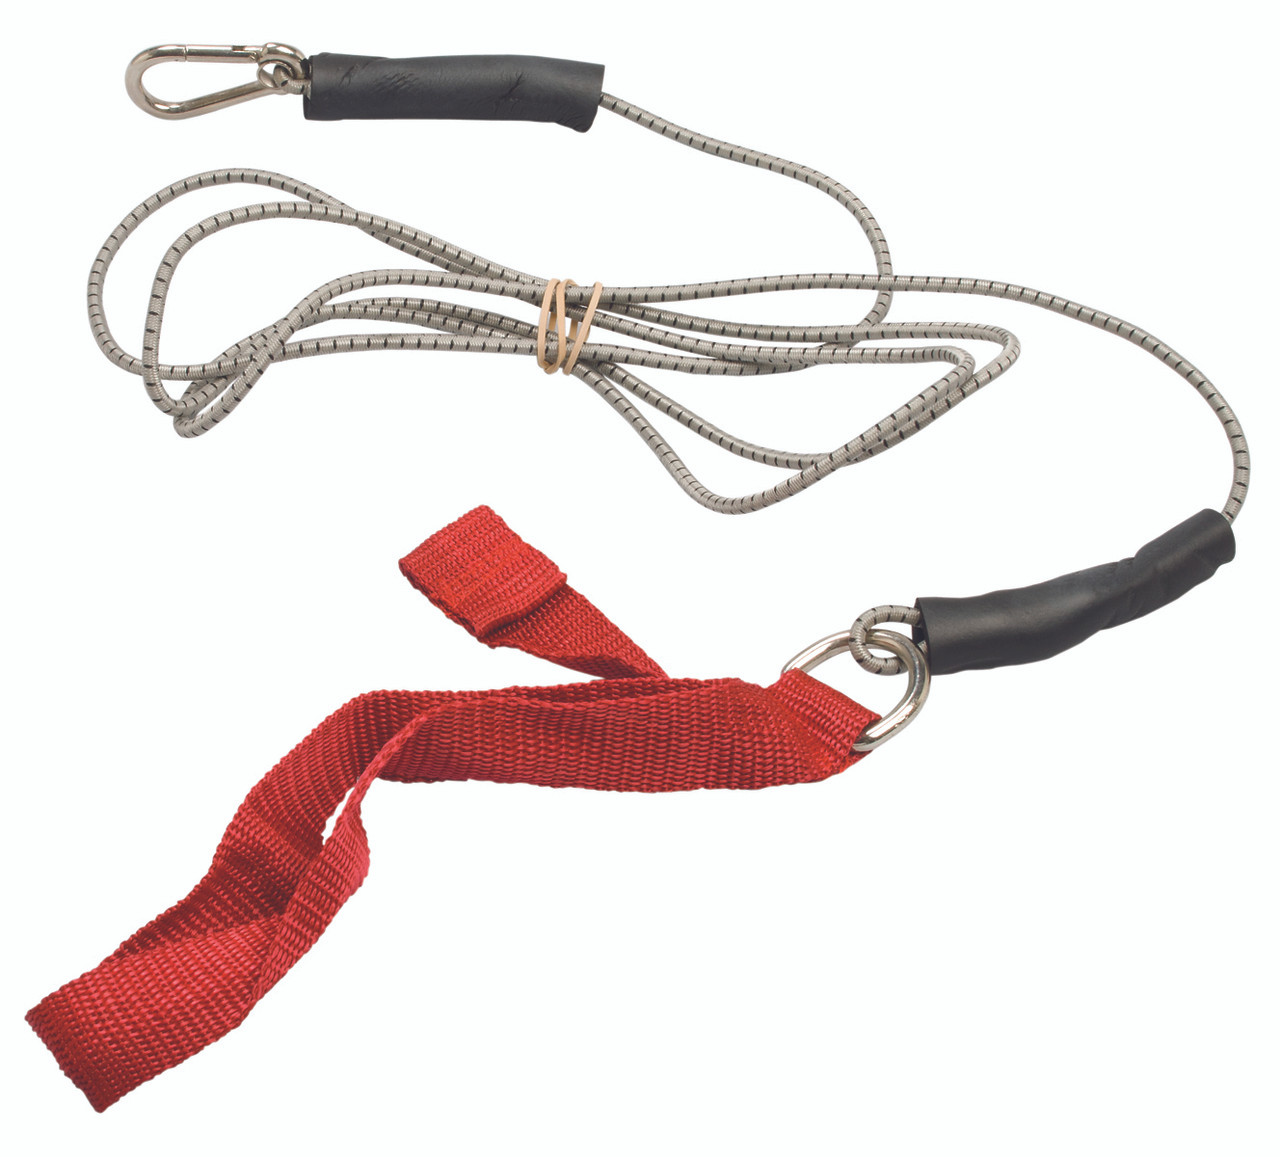 CanDo¨ exercise bungee cord with attachments, 7', Red - light